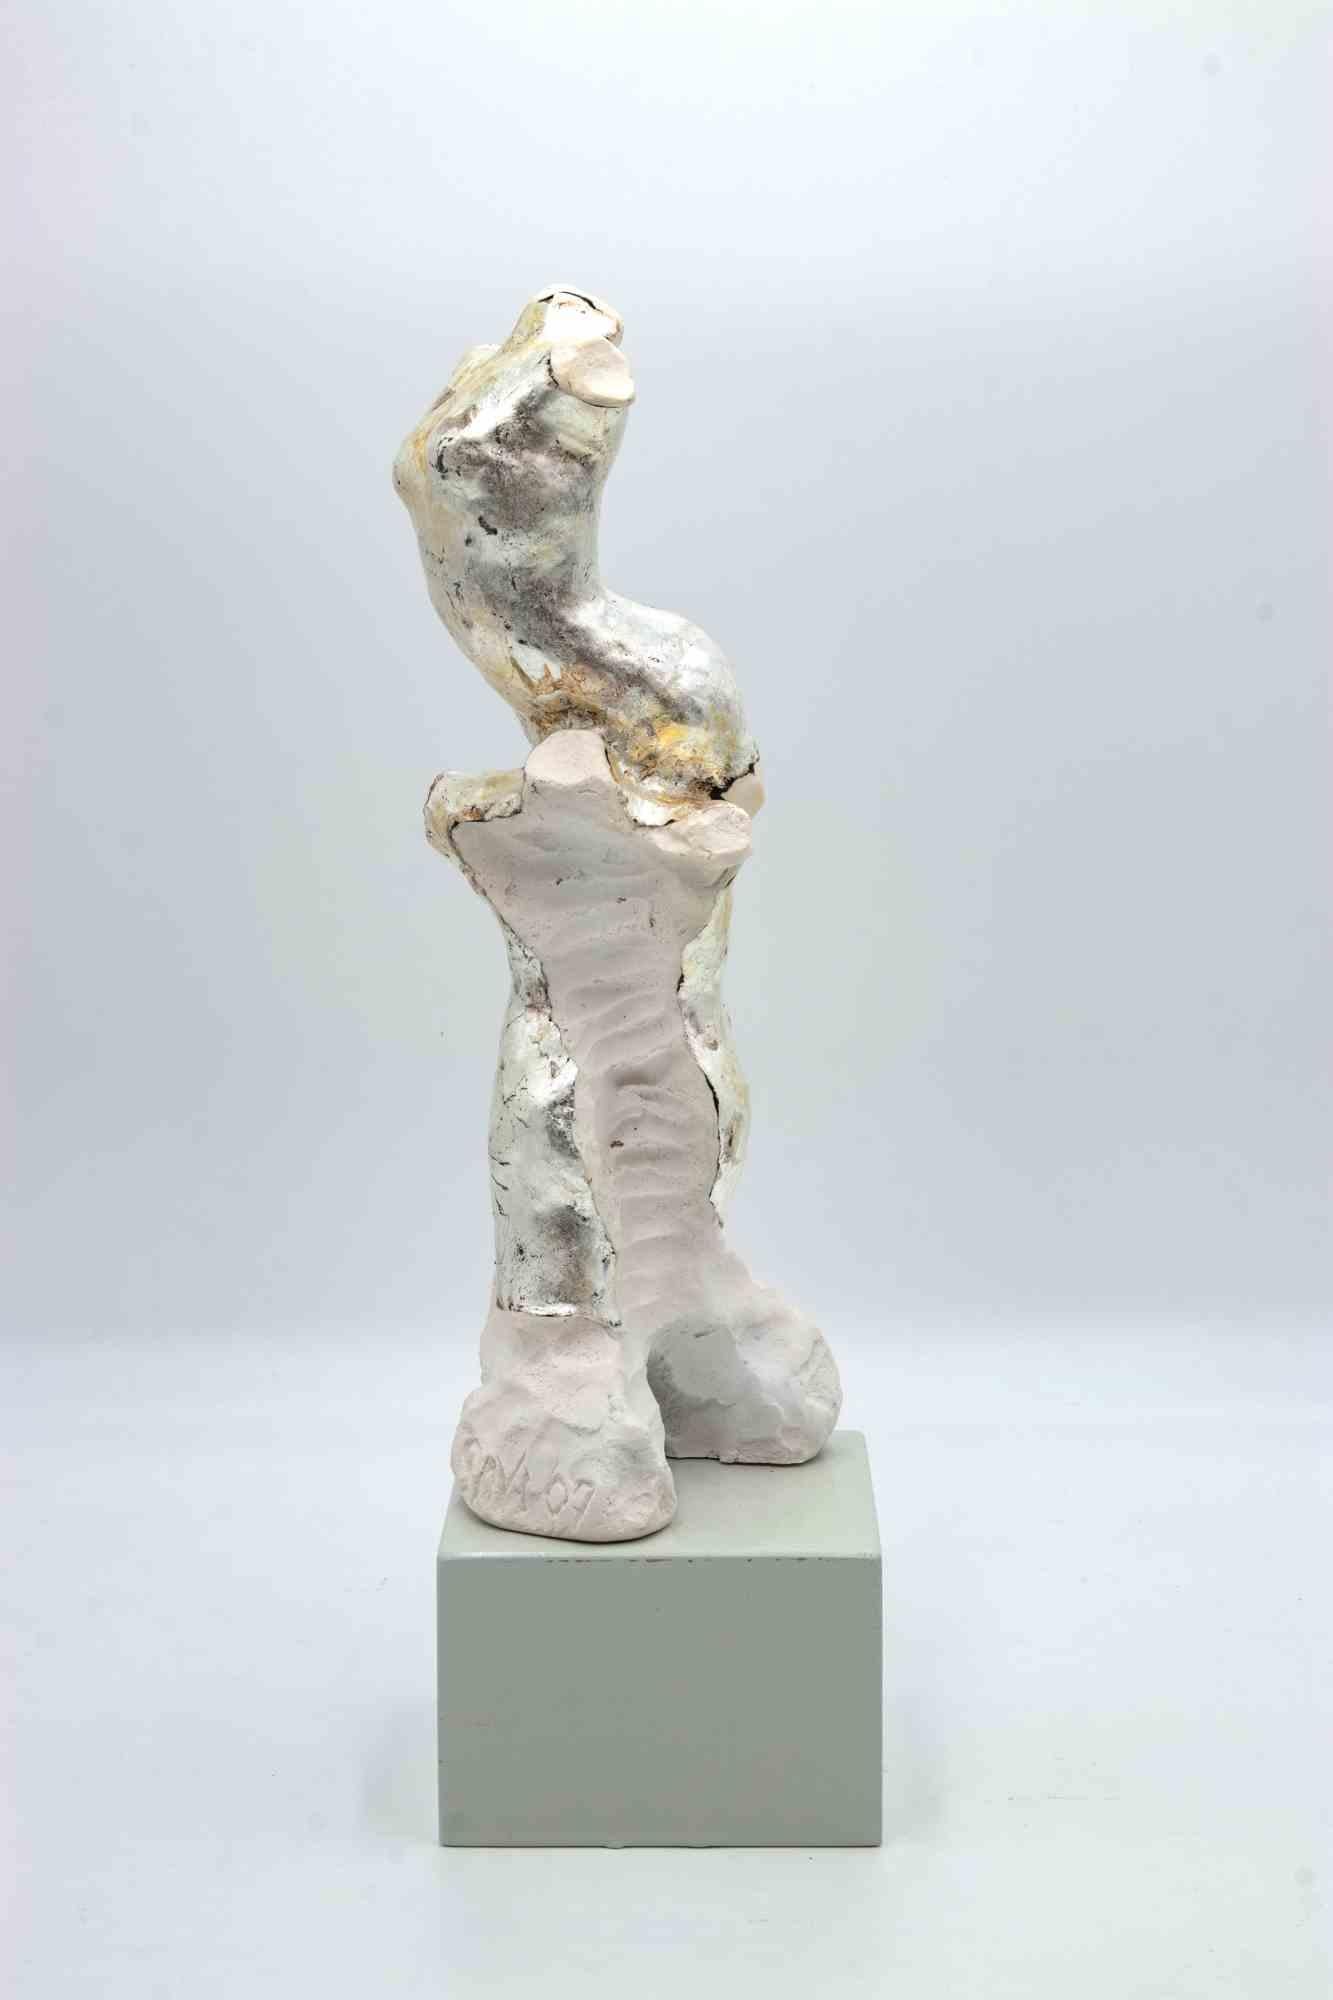 Body of woman is an original sculpture realized by Fabrizio Savi in the 2000s. 

Two  bodies emerge from the plaster material across each other in an upward thrust.

Lacquered plaster.

38X11 cm with wooden base included.

Signature engraved on the